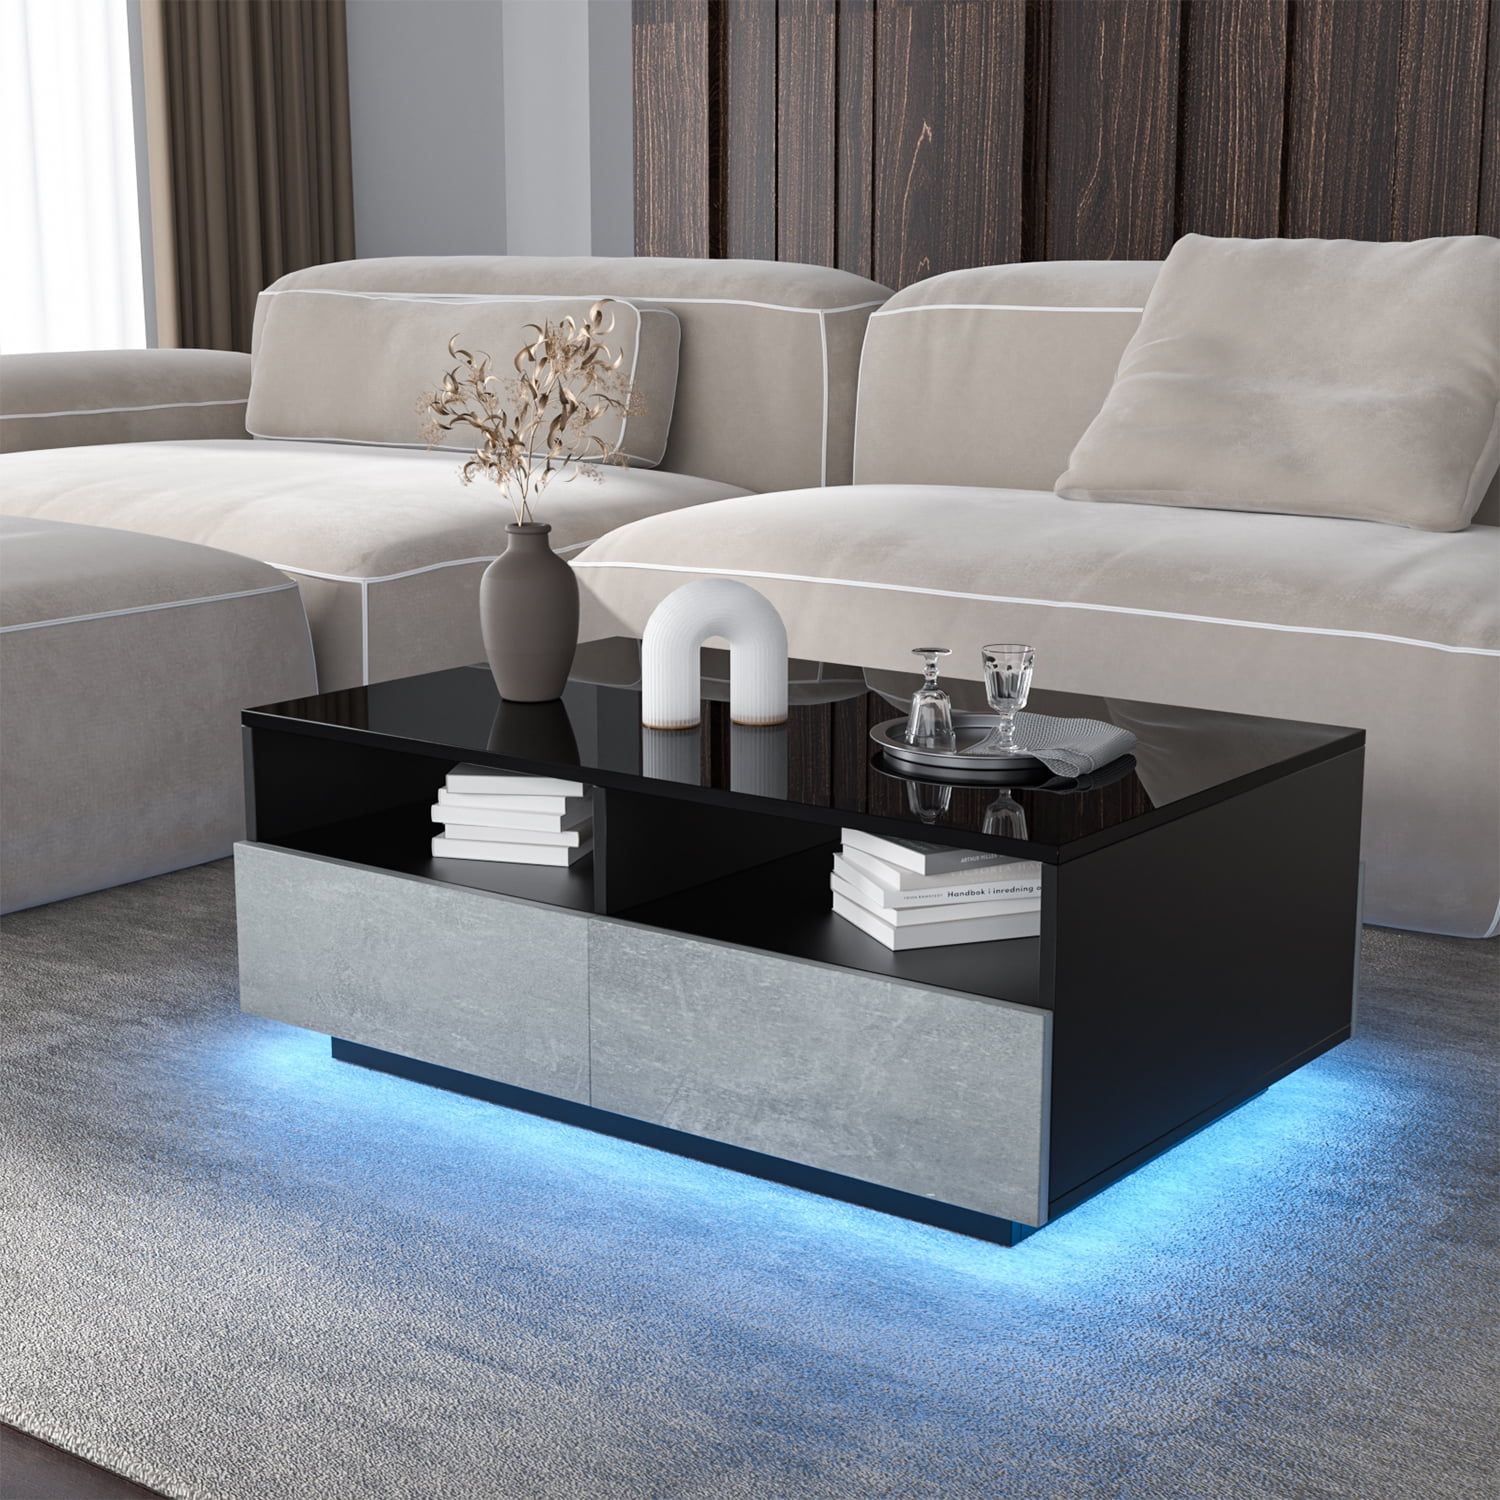 Hommpa Coffee Table Rgb Led Rectangular Center Table With Remote Control  Mordern Sofa Side Cocktail Storage Tables Gray Black For Living Room –  Walmart With Regard To Rectangular Led Coffee Tables (View 15 of 15)